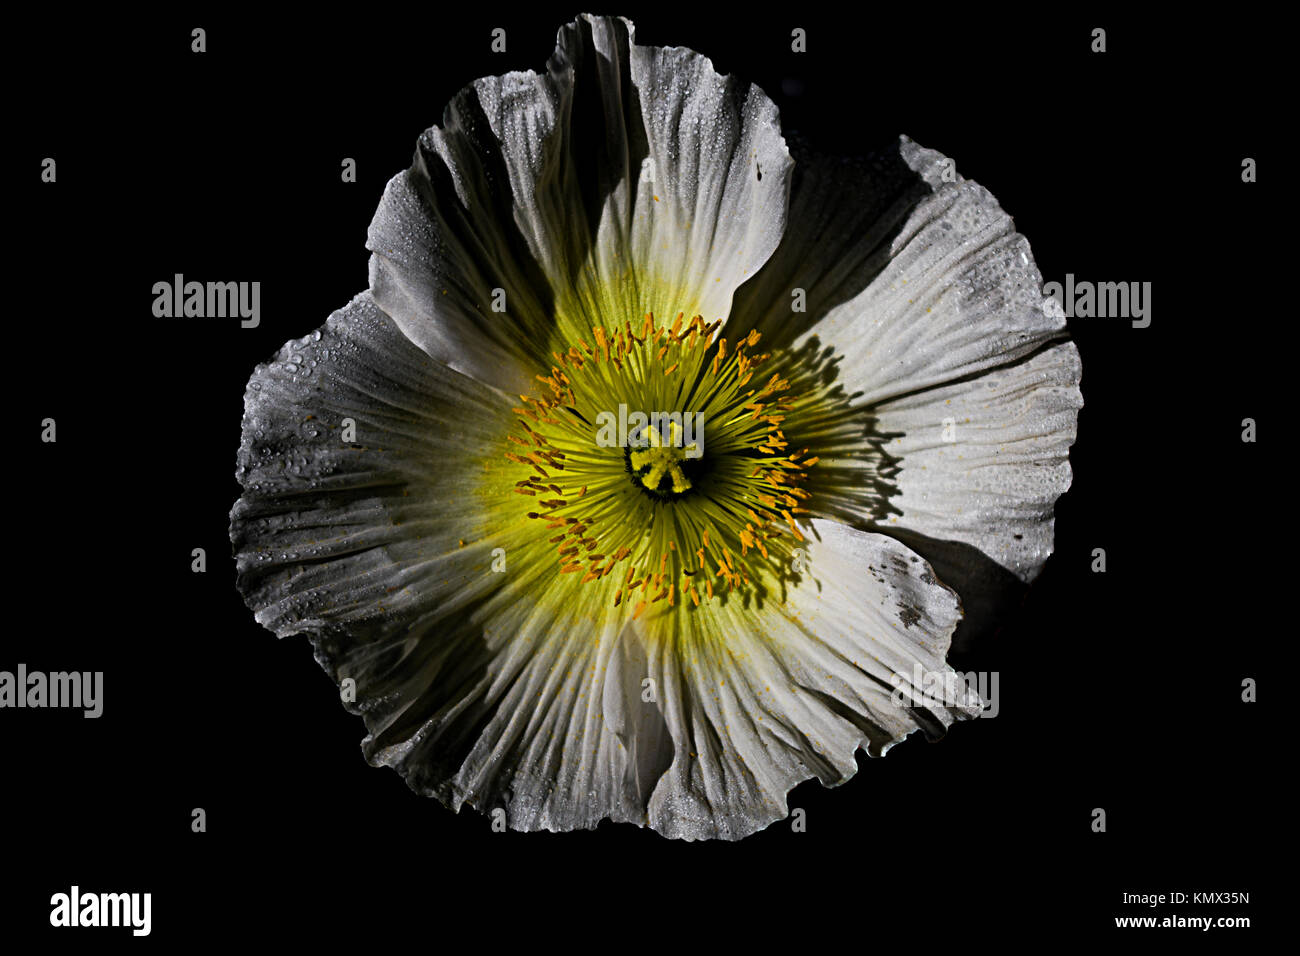 Large, White Tree Peony with Yellow Center on Black Background, Exhibiting Radial Symmetry, Photographed in a Garden Stock Photo